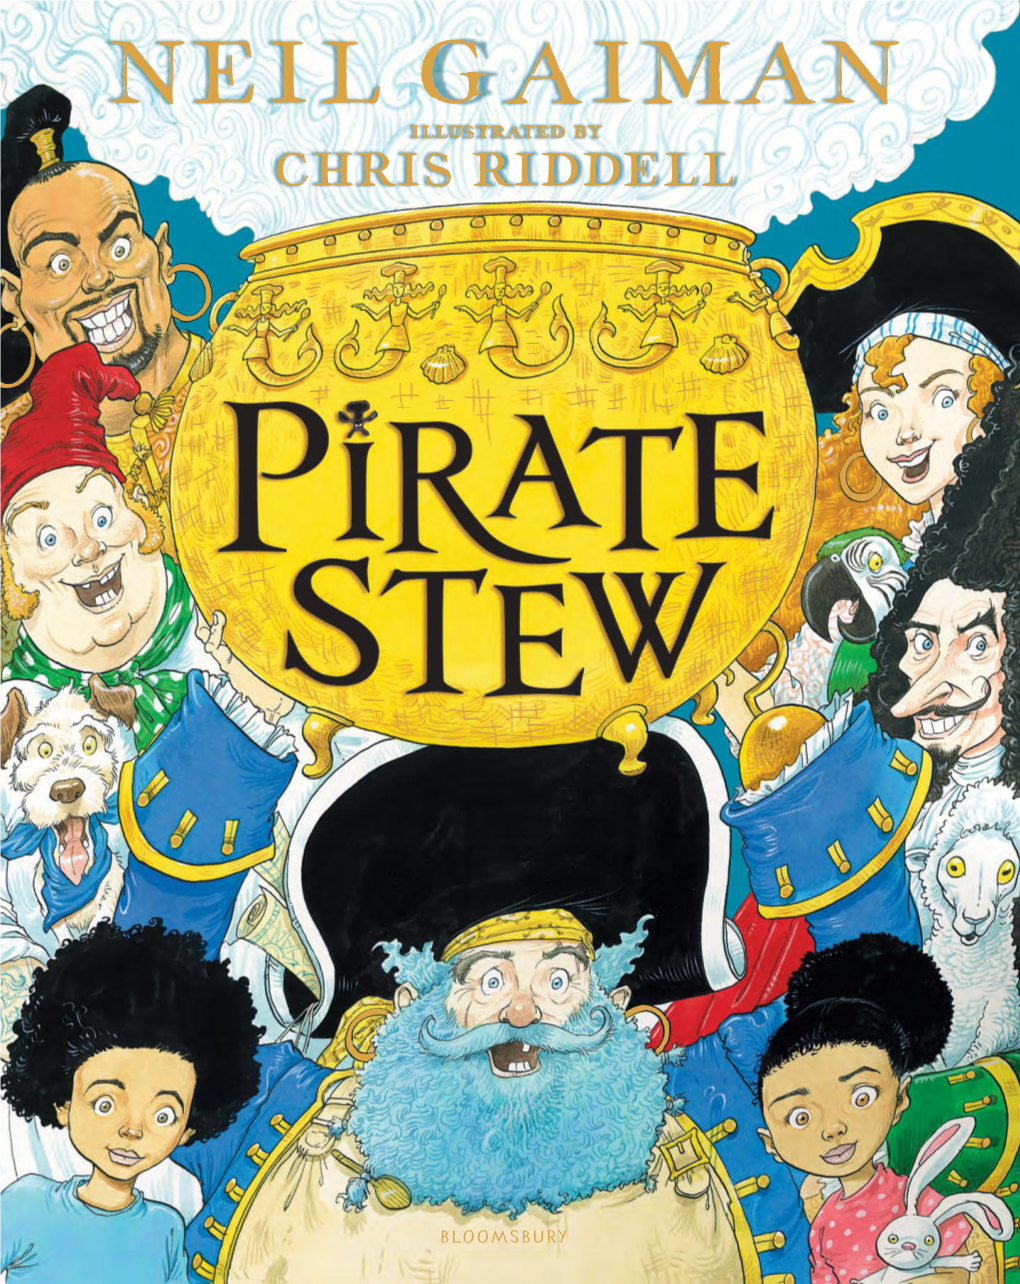 CHRIS RIDDELL Has Written Highly Acclaimed Books for Both Ship’S Cook